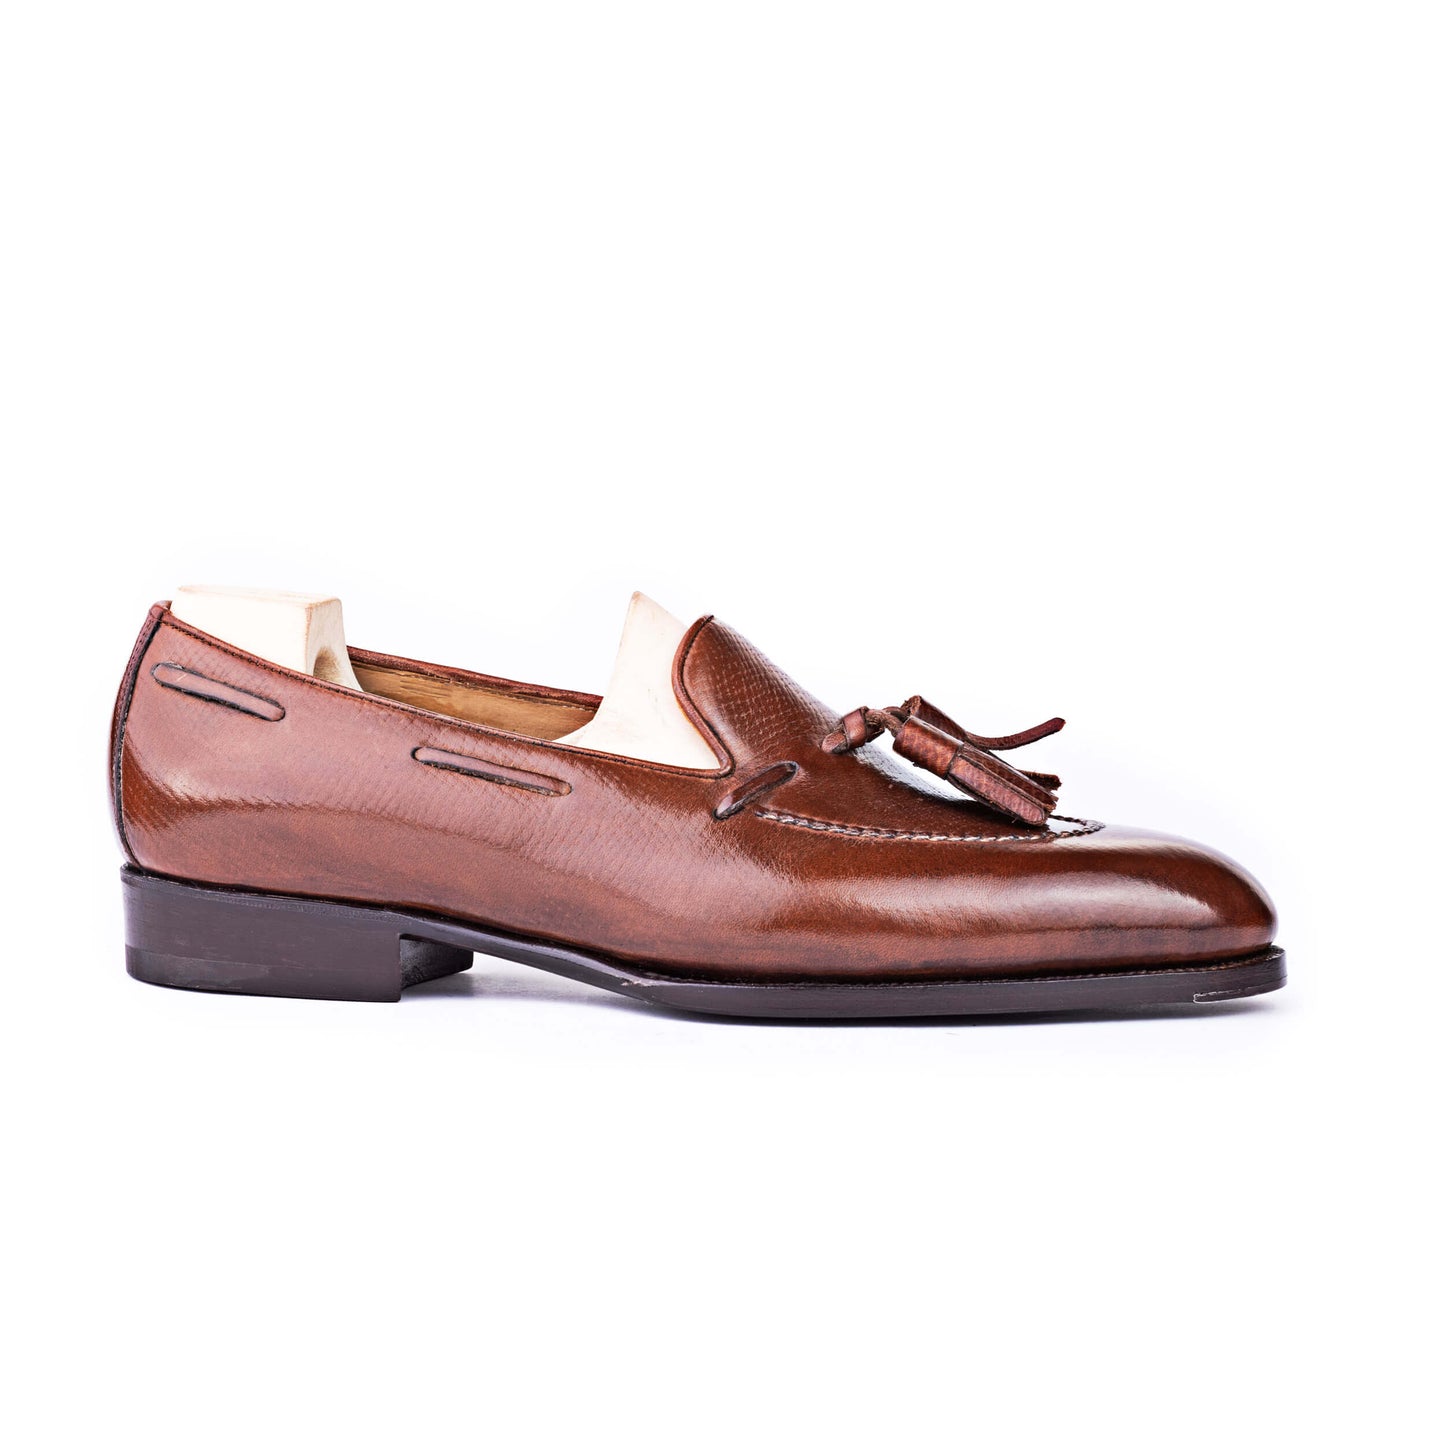 Russian Calf Tassel Loafer with hand stitched Apron